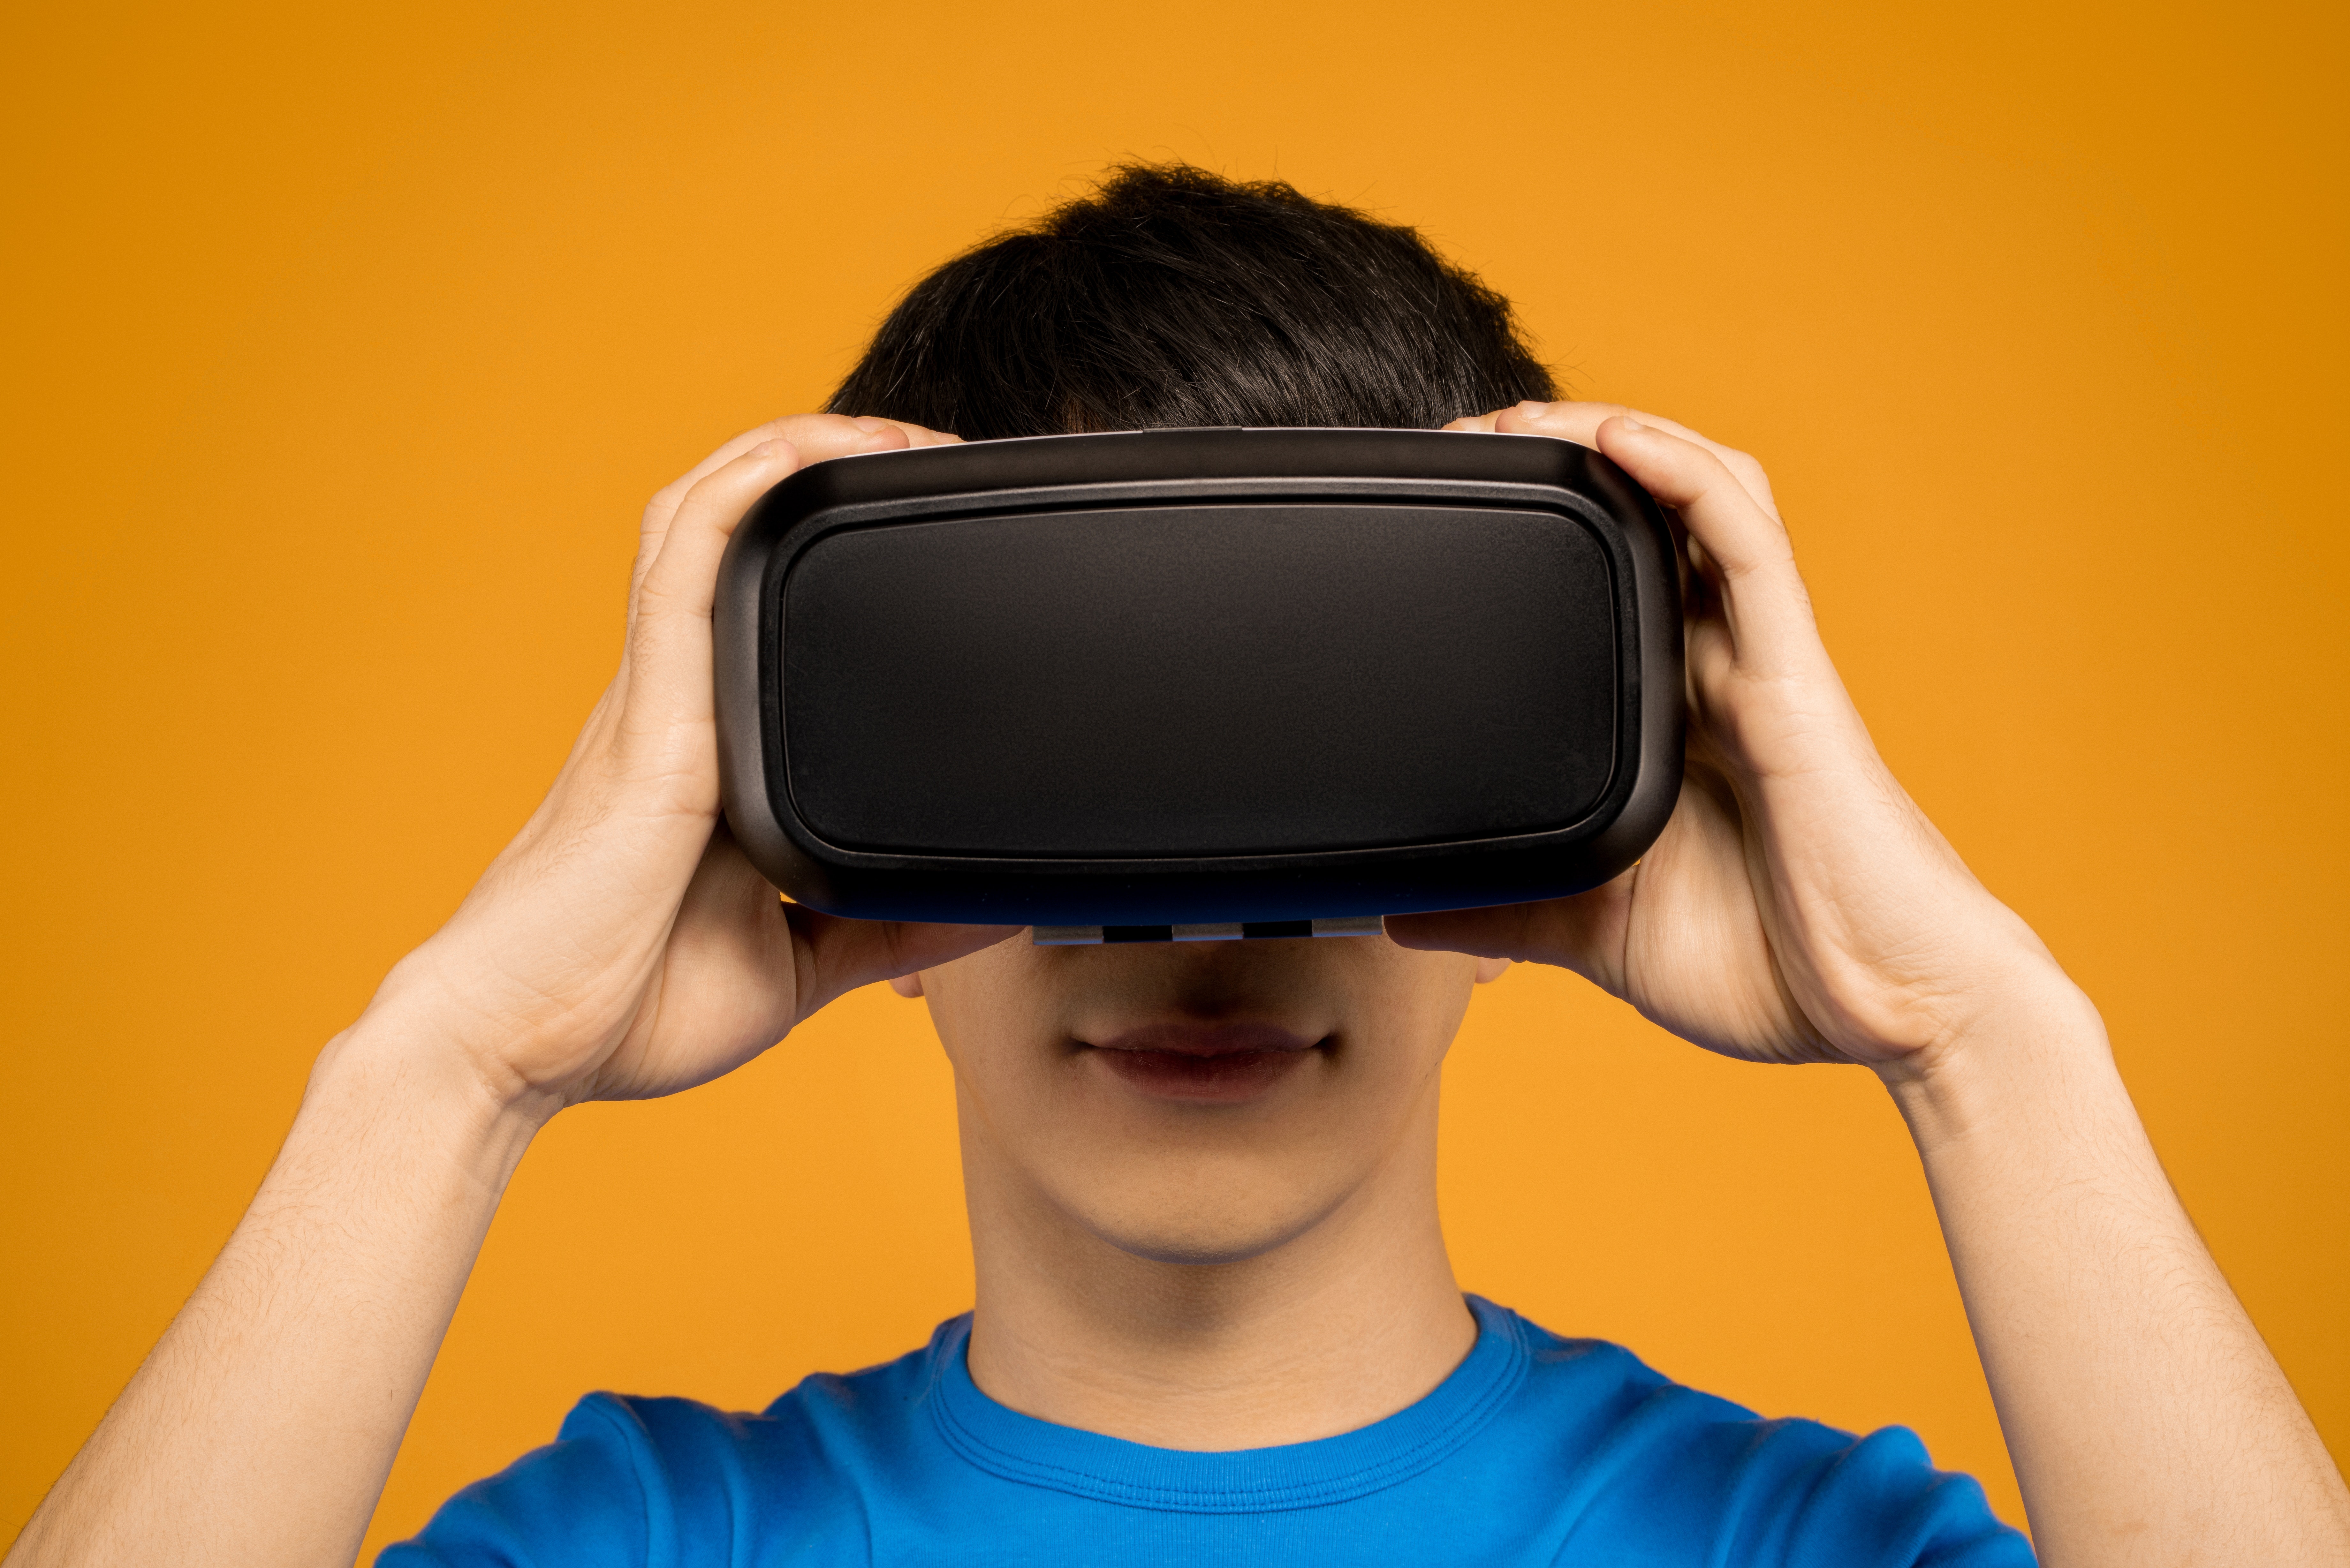 Image shows a person in a blue t-shirt holding a VR headset up to their face against a yellow background.